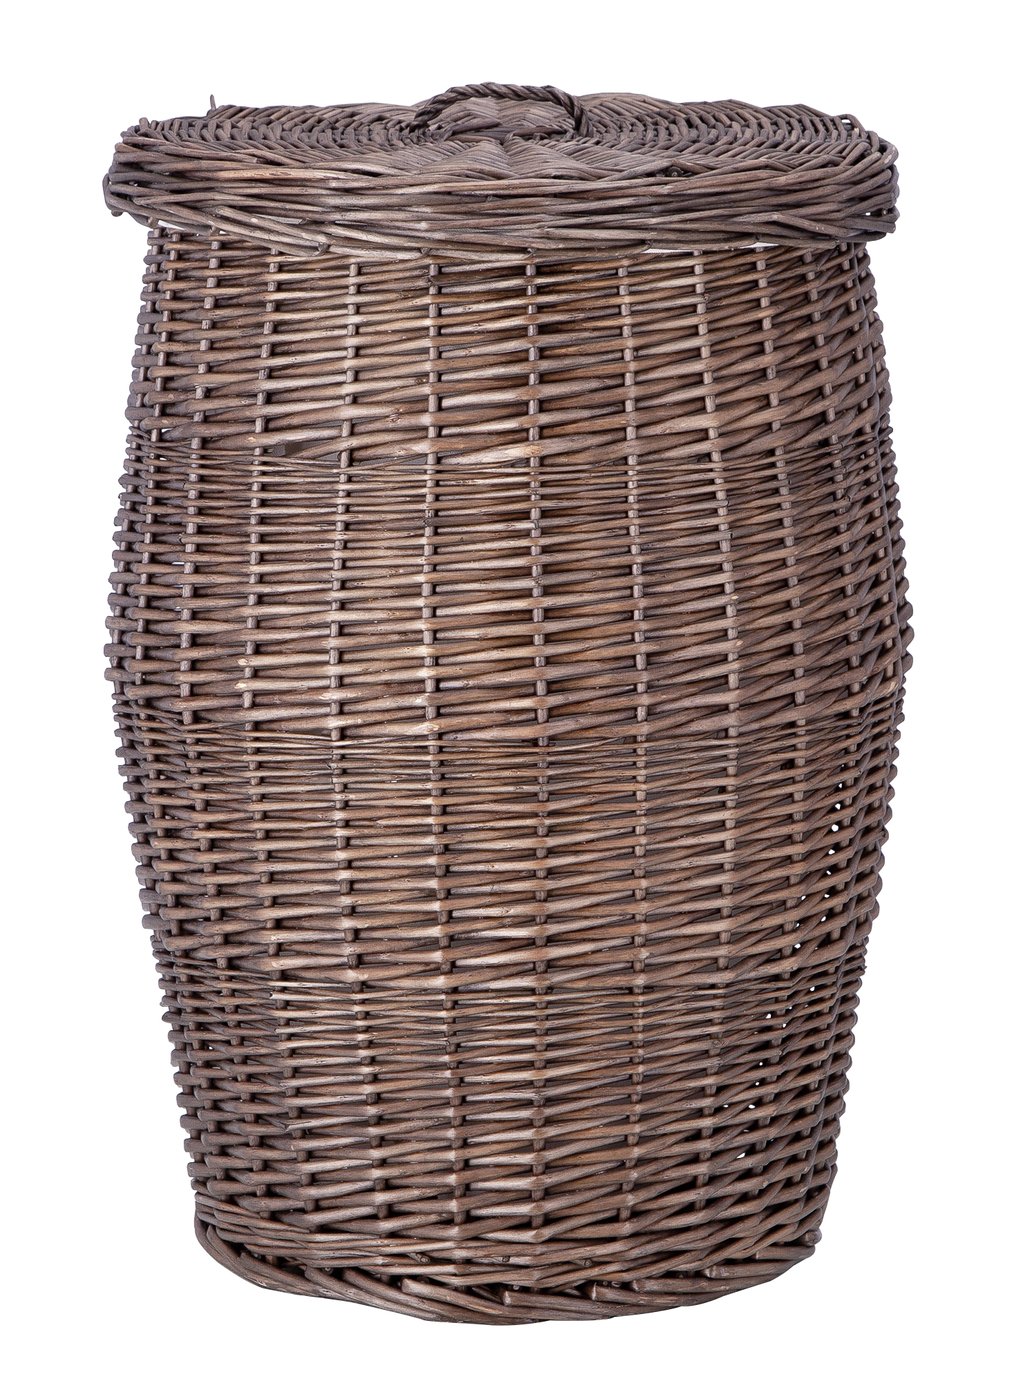 Argos Home Woven 64 Litre Wicker Laundry Basket review